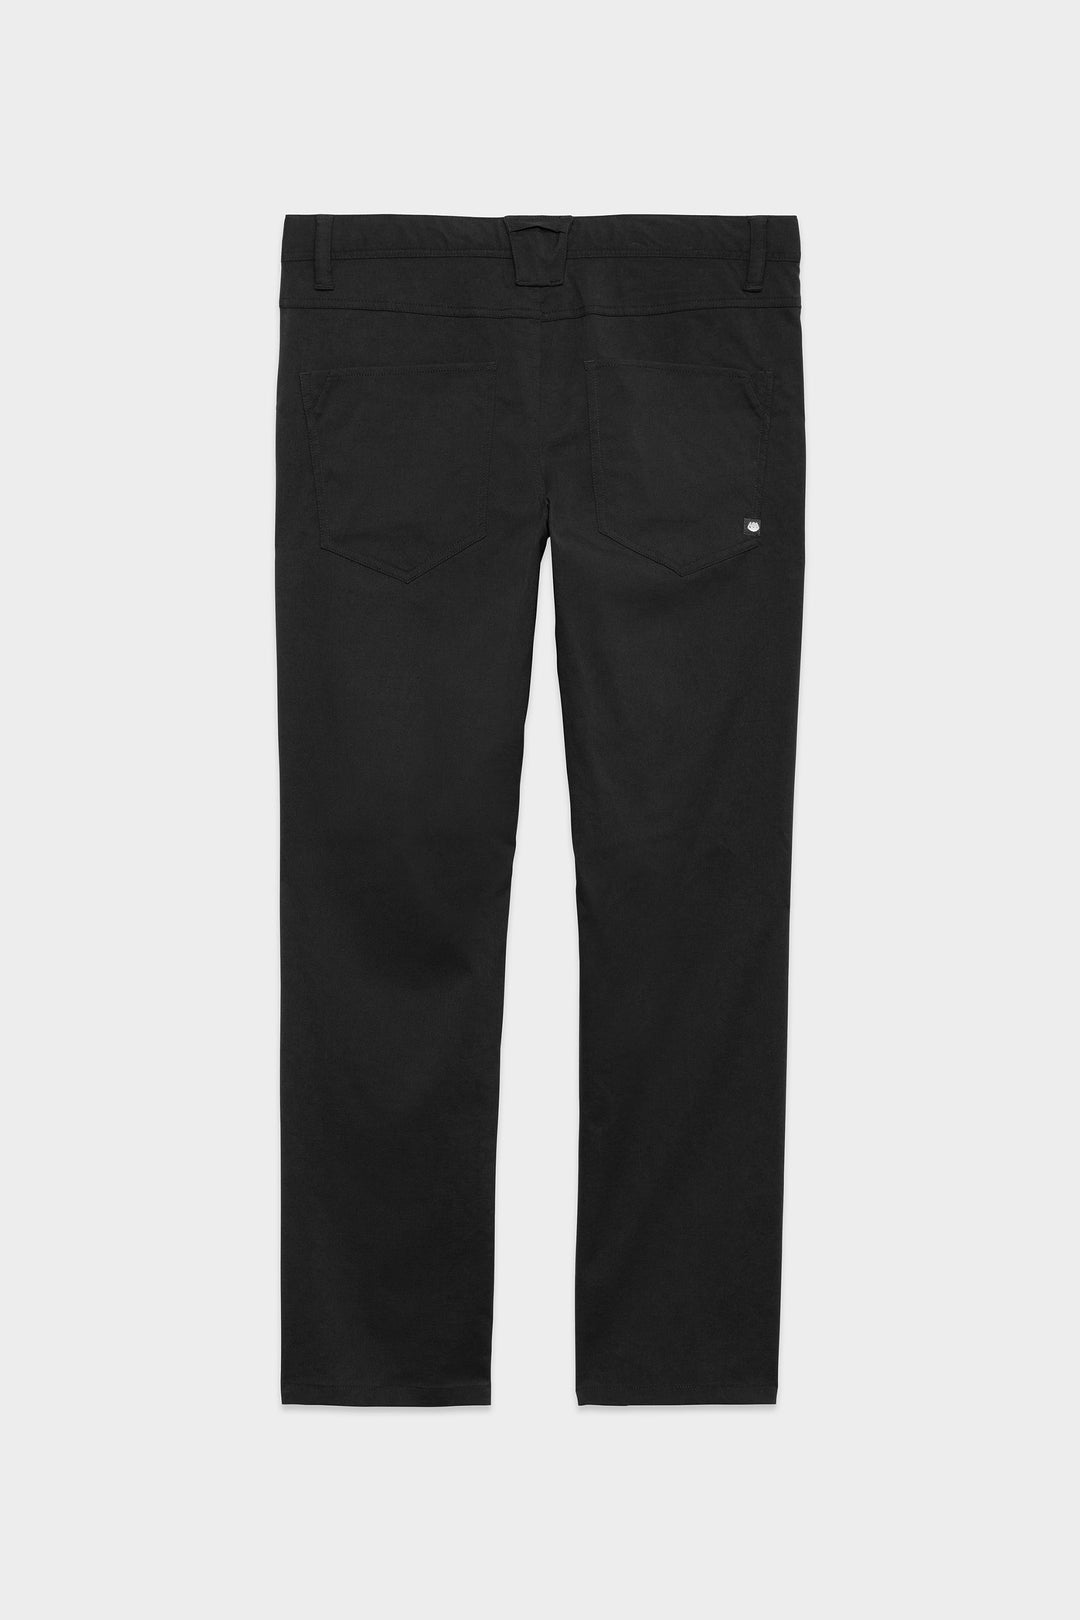 686 Everywhere Pant Relaxed Fit - Black